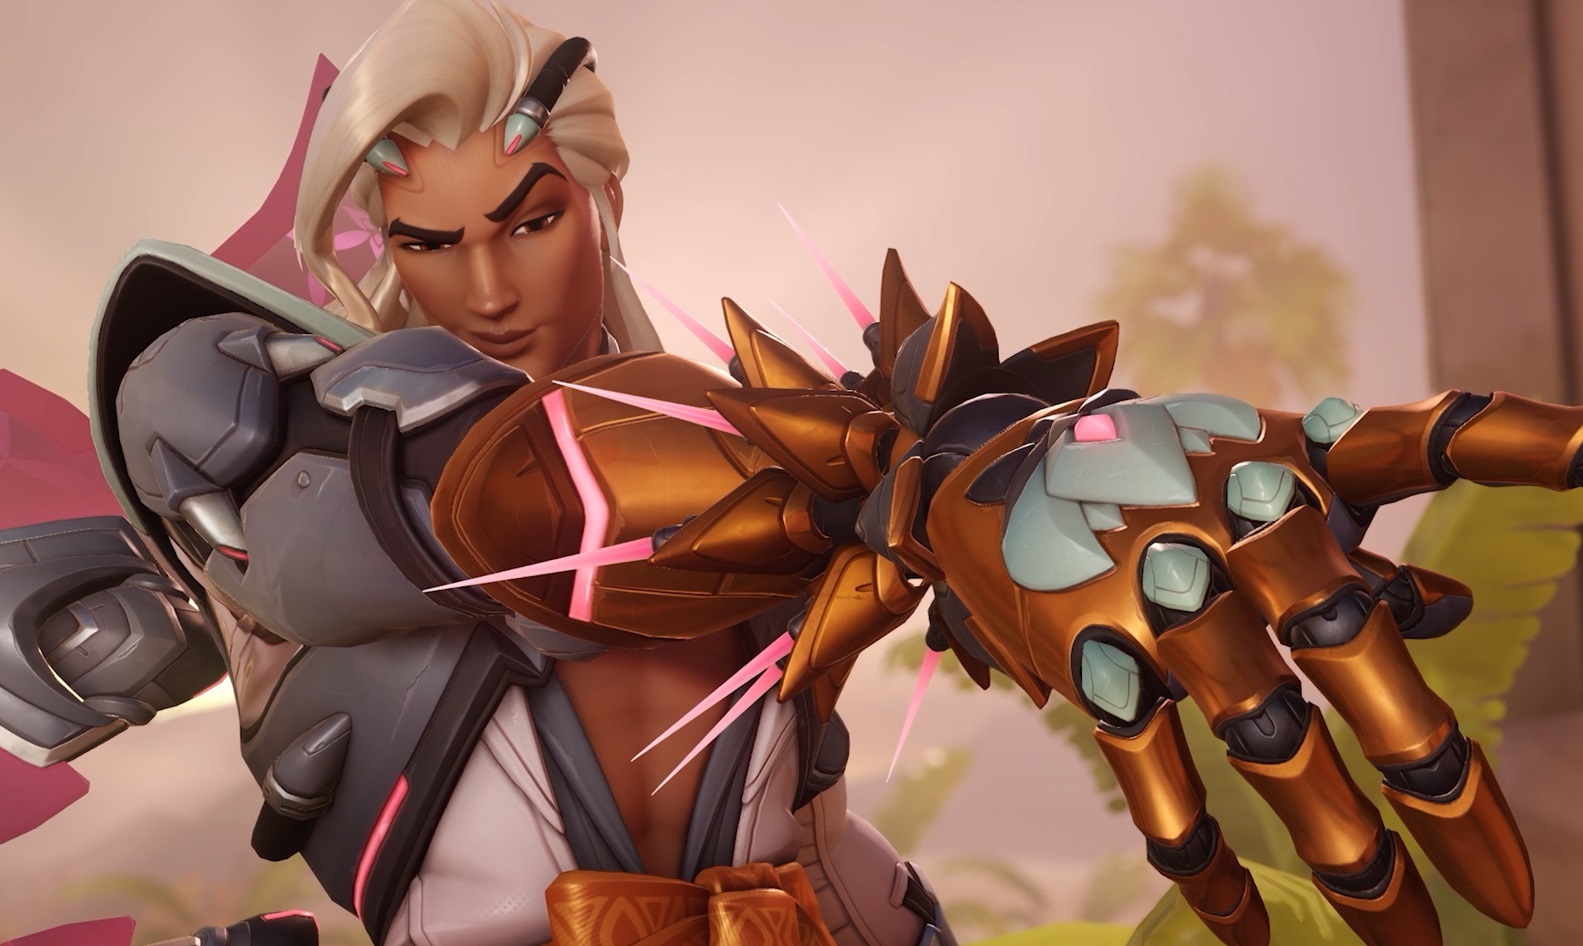 Overwatch 2 Reveals More Details About Lifeweaver and Upcoming Battle Pass Changes